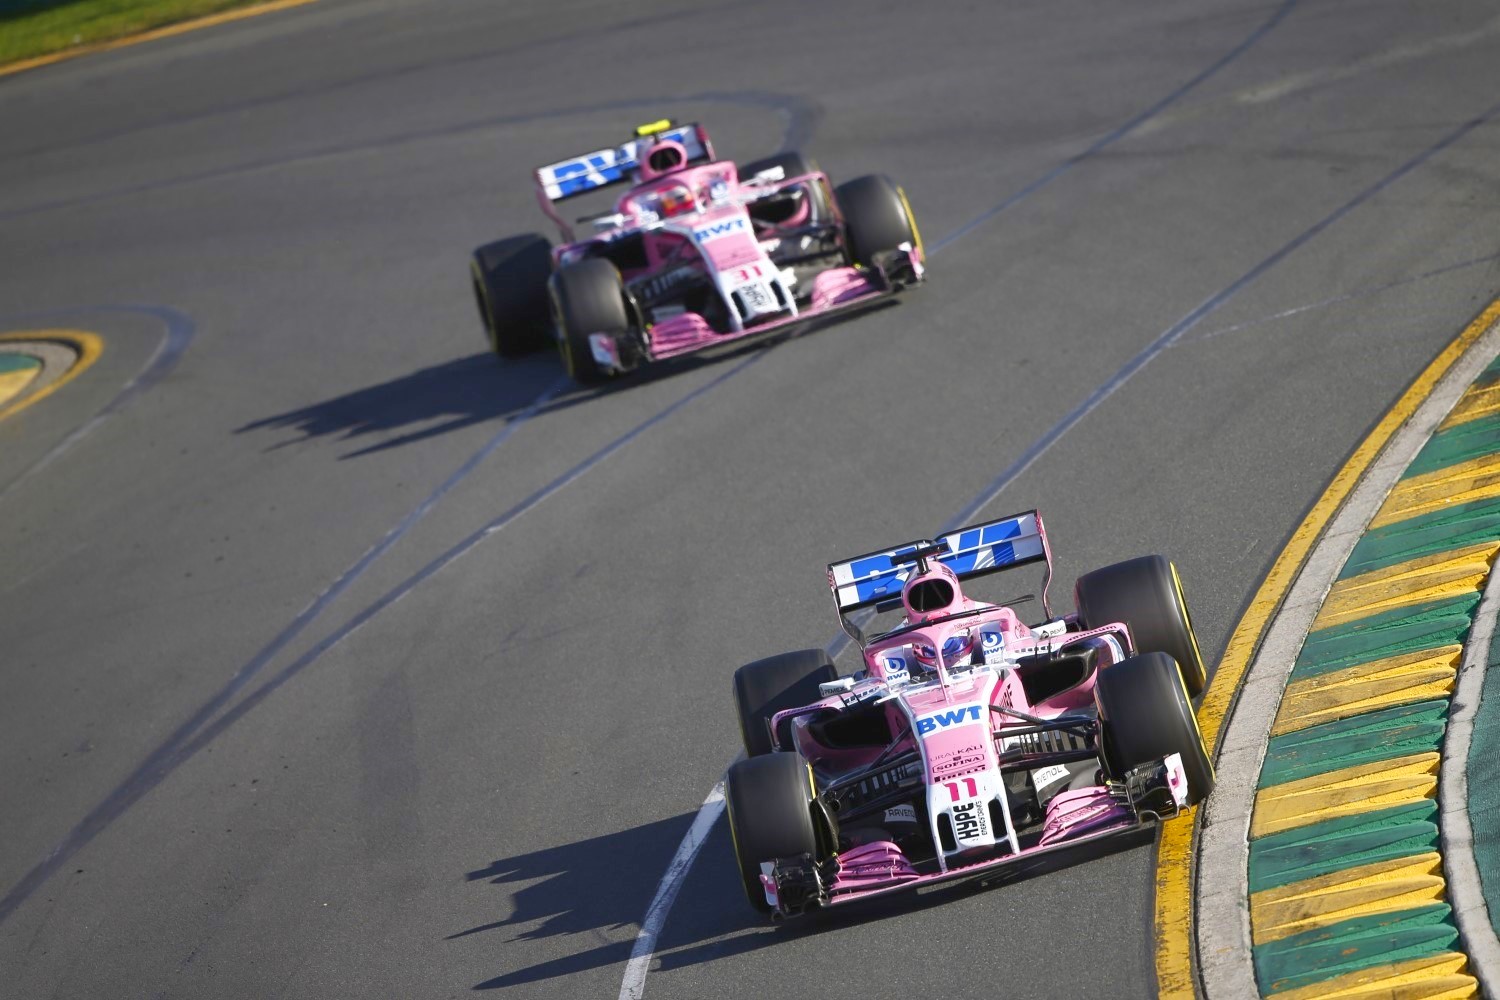 The pink Force India cars have the Mercedes 'party' mode engine